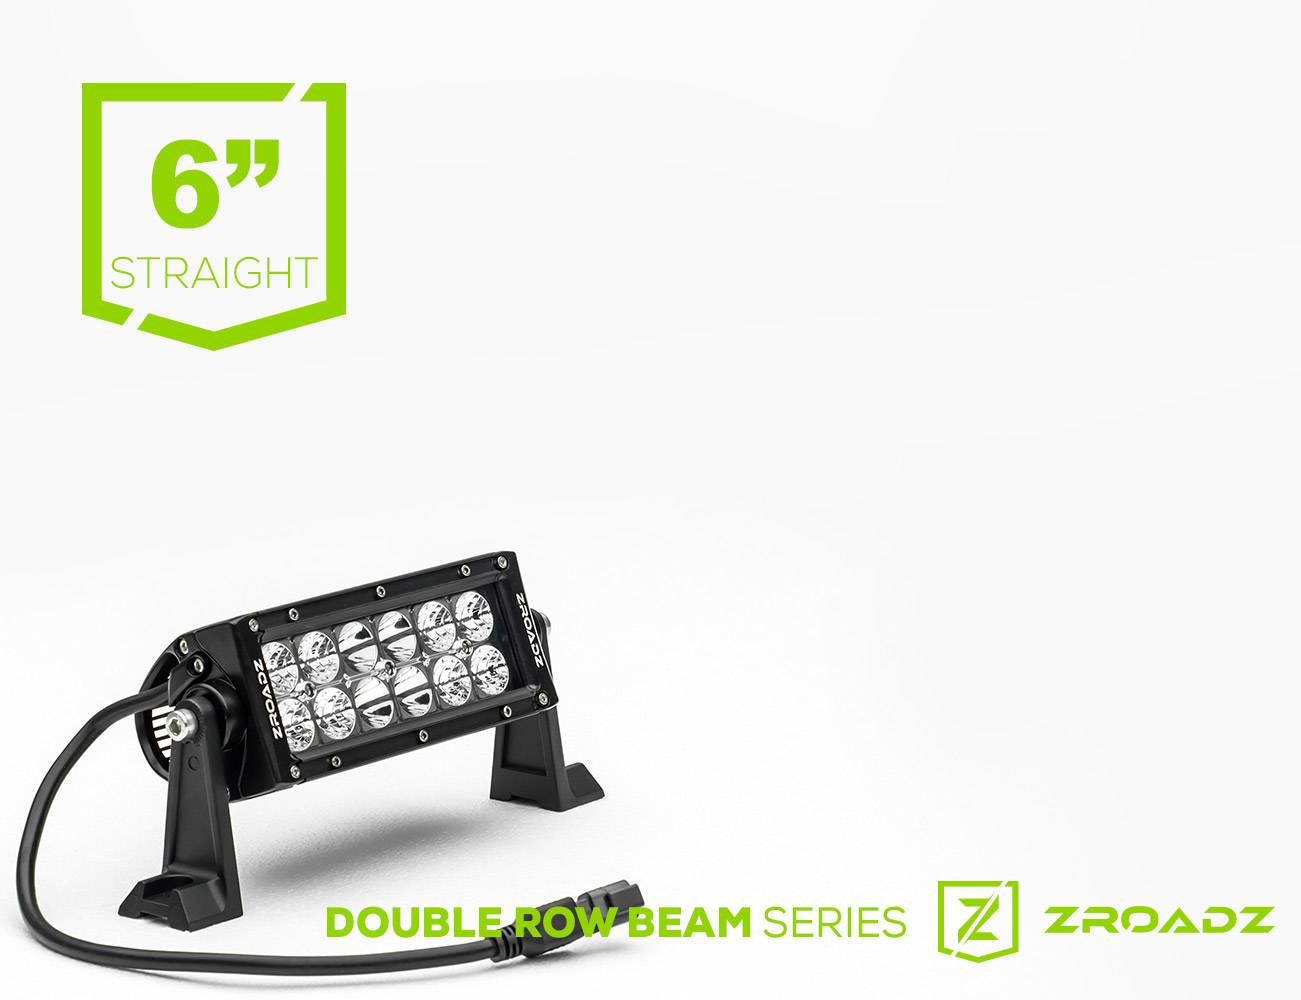 ZROADZ OFF ROAD PRODUCTS - 6 Inch LED Straight Double Row Light Bar - Part # Z30BC14W36